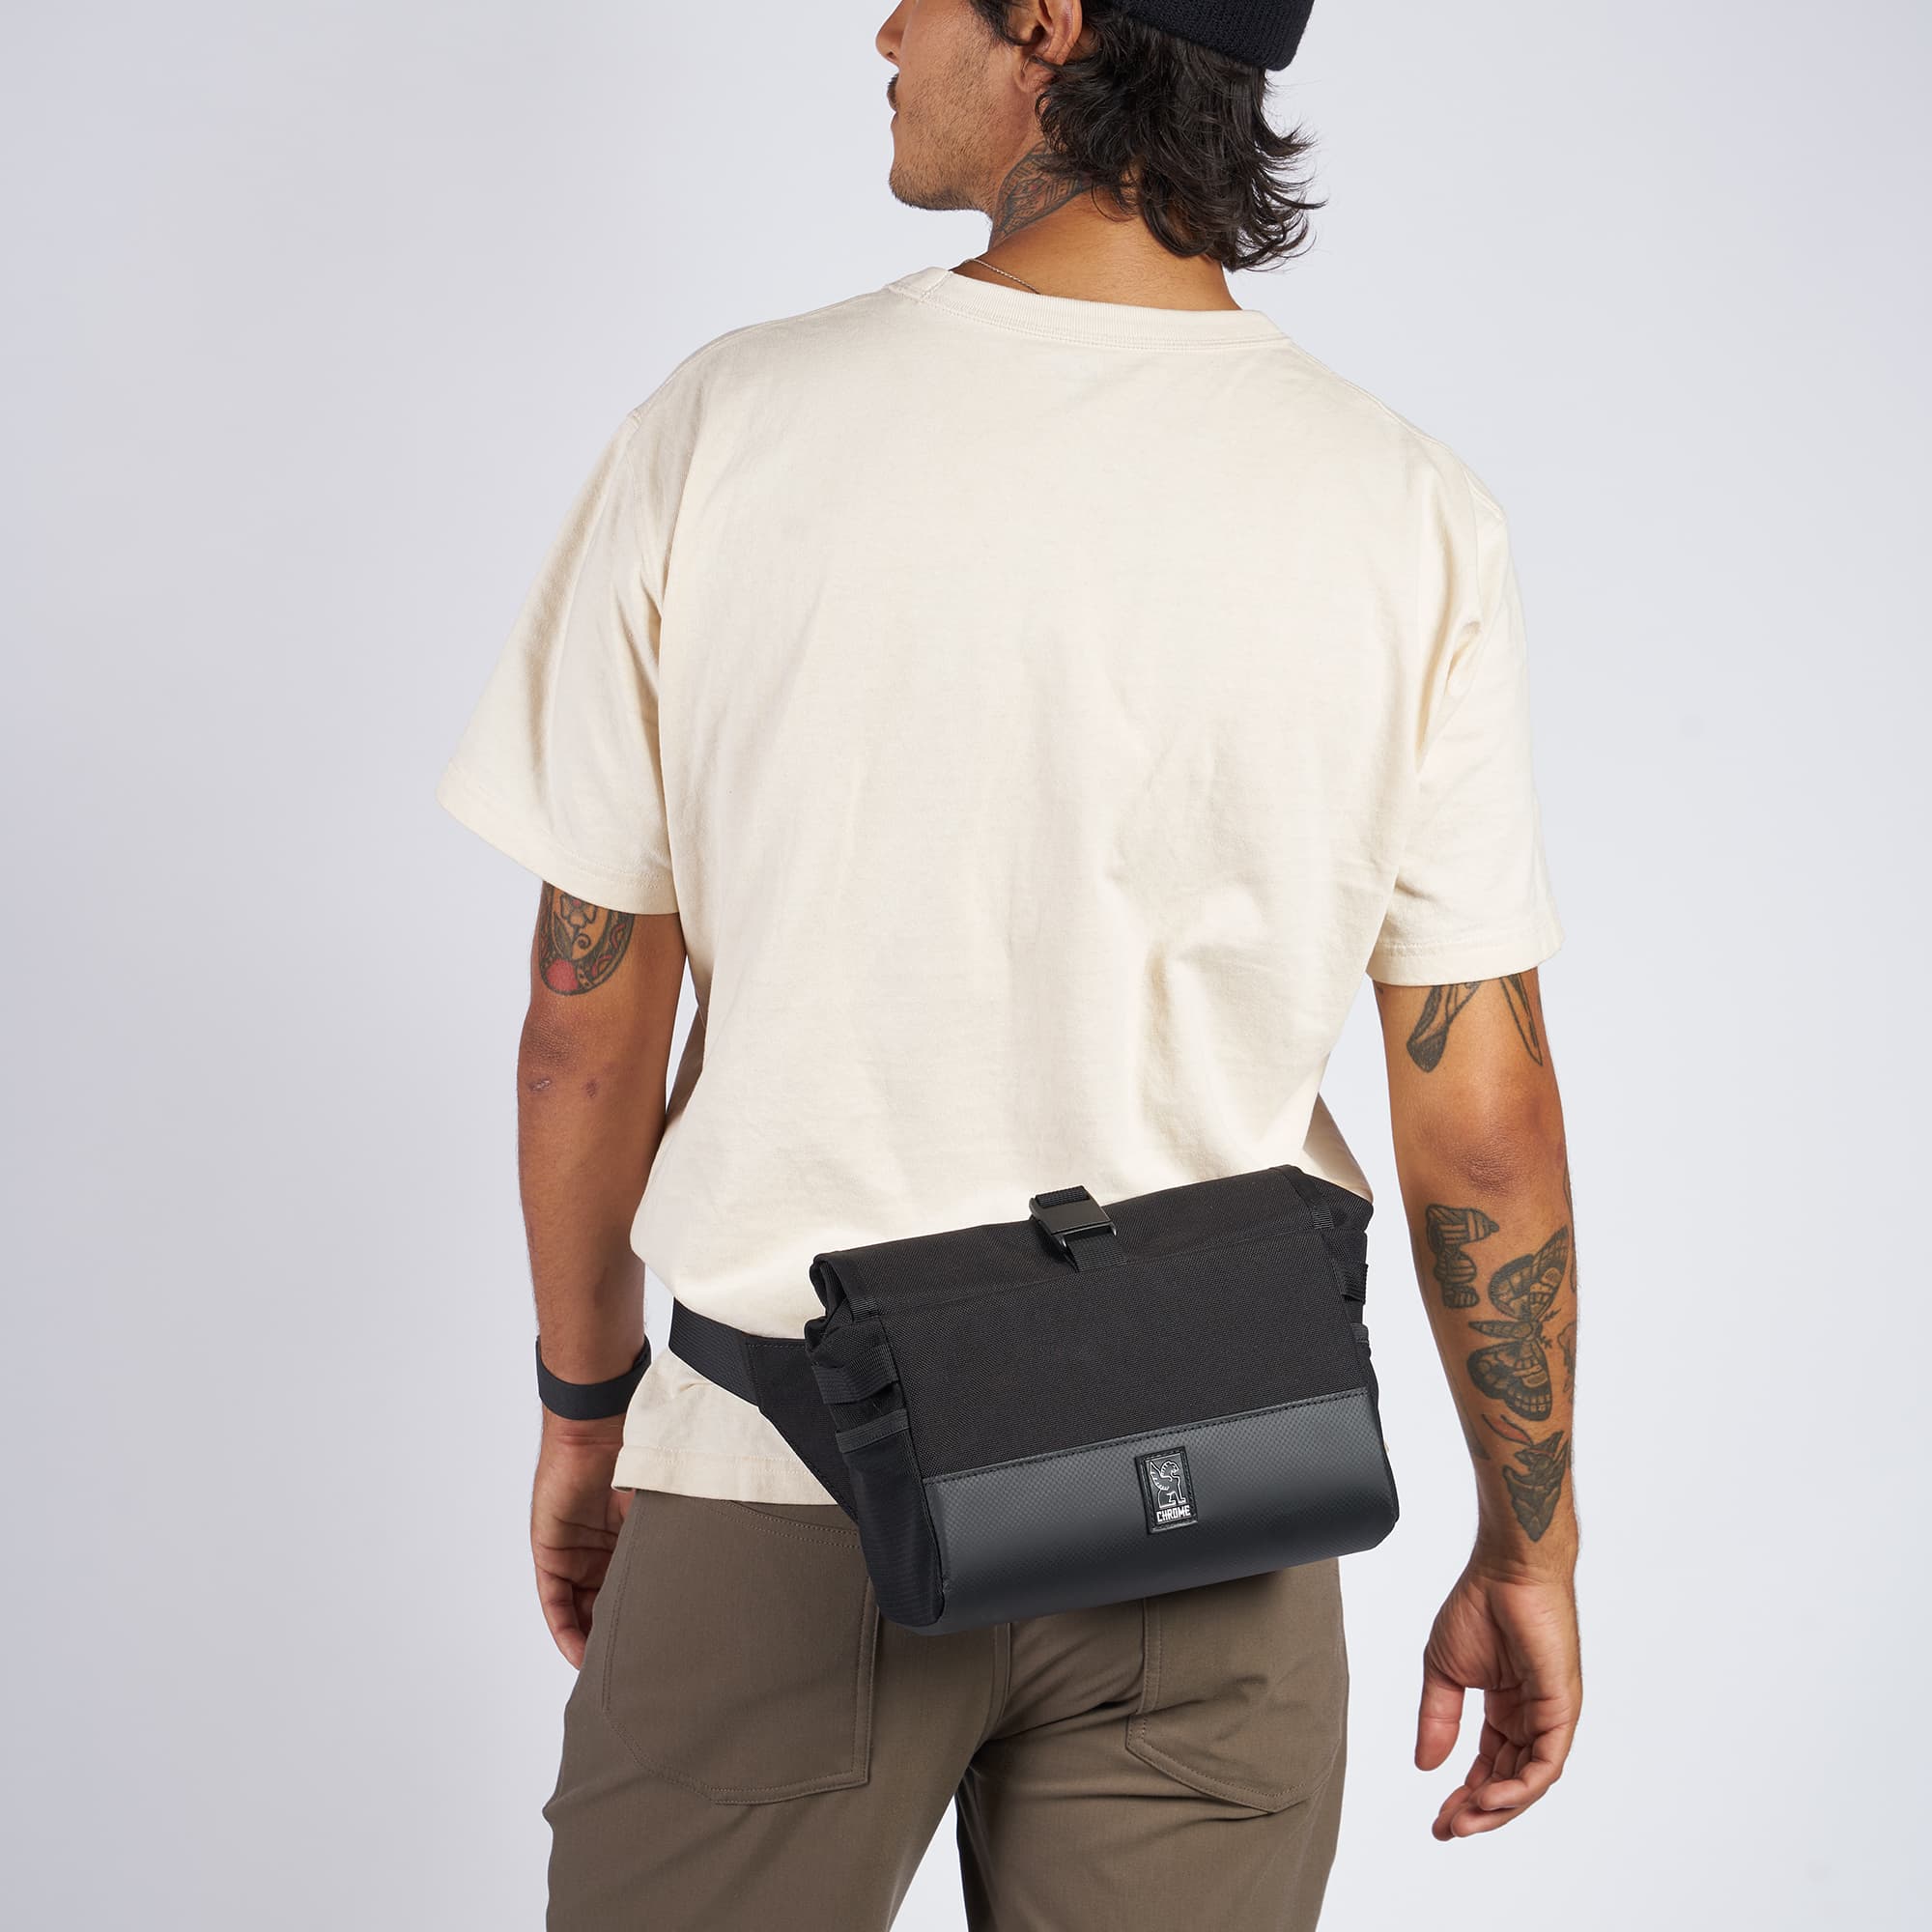 5L Doubletrack Handlebar Sling in black on a man as a hip pack